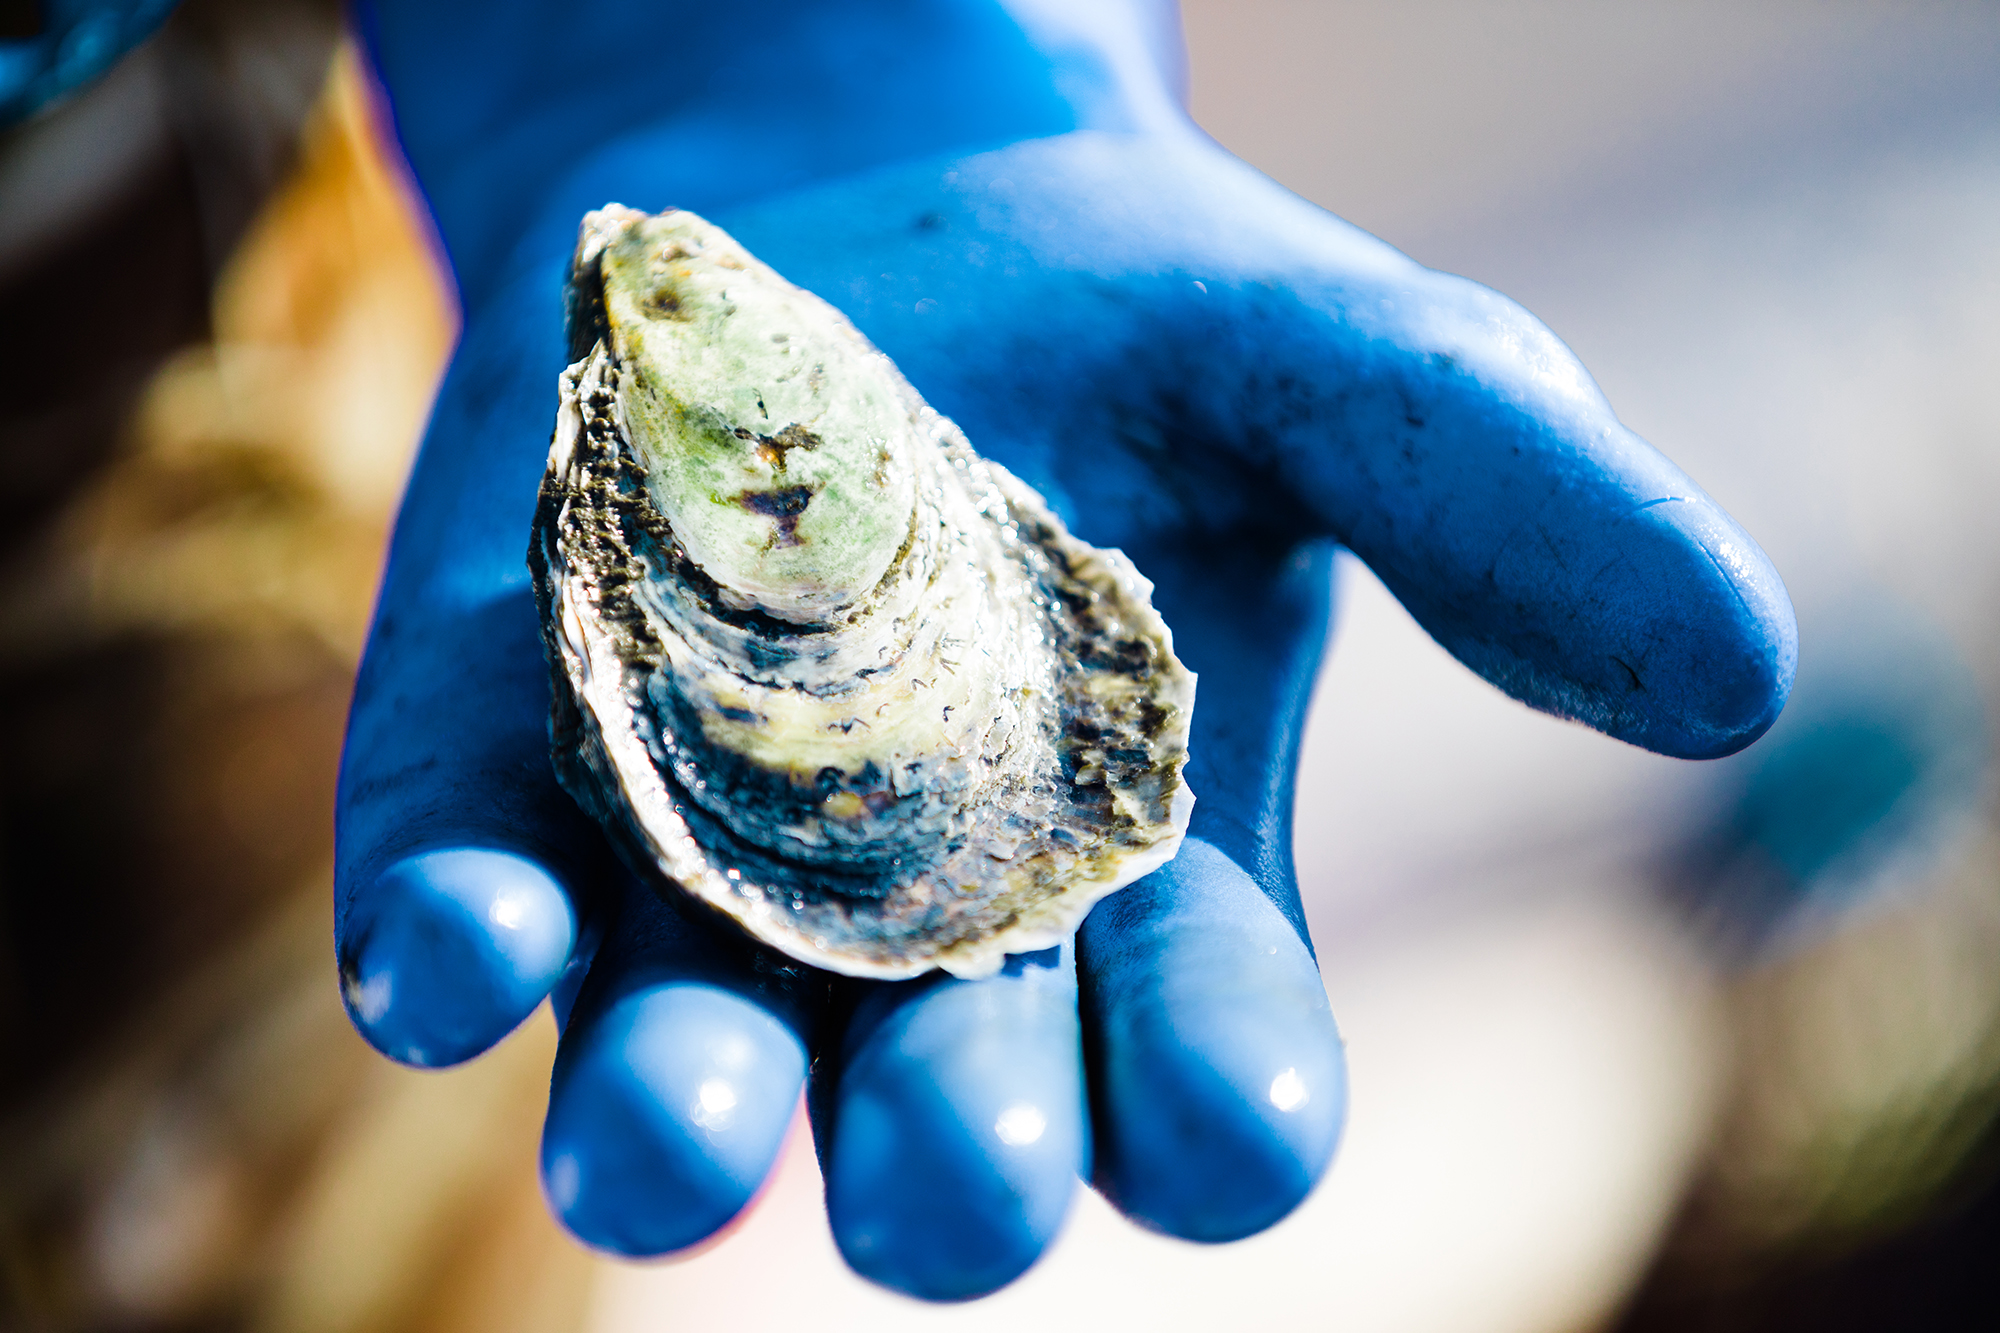 image: oyster in hand.